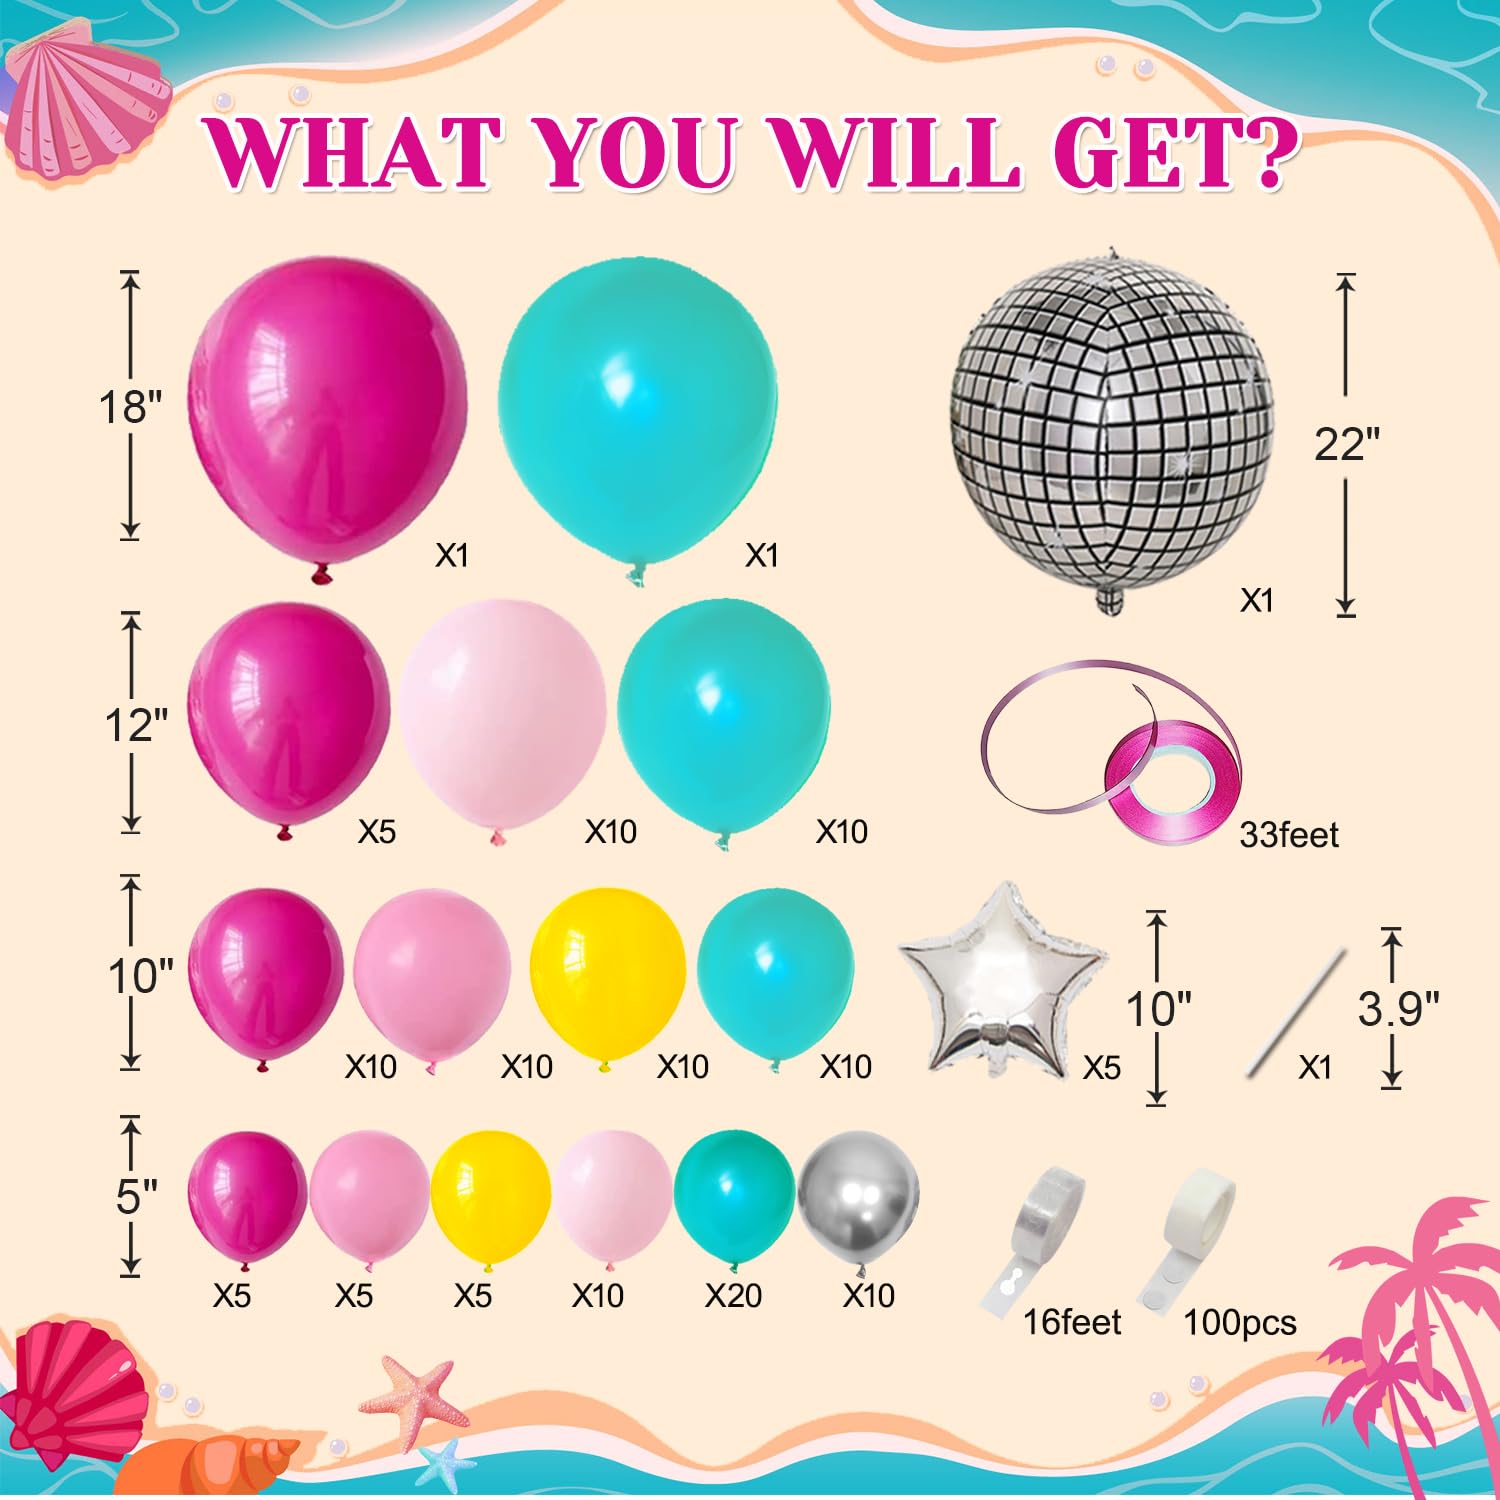 137PCS Pink Teal Balloon Garland Arch Kit with Hot Pink Silver Disco Roller Skate Balloon for Priness Theme Birthday Party Girl Summer by Beach Pool party decorations